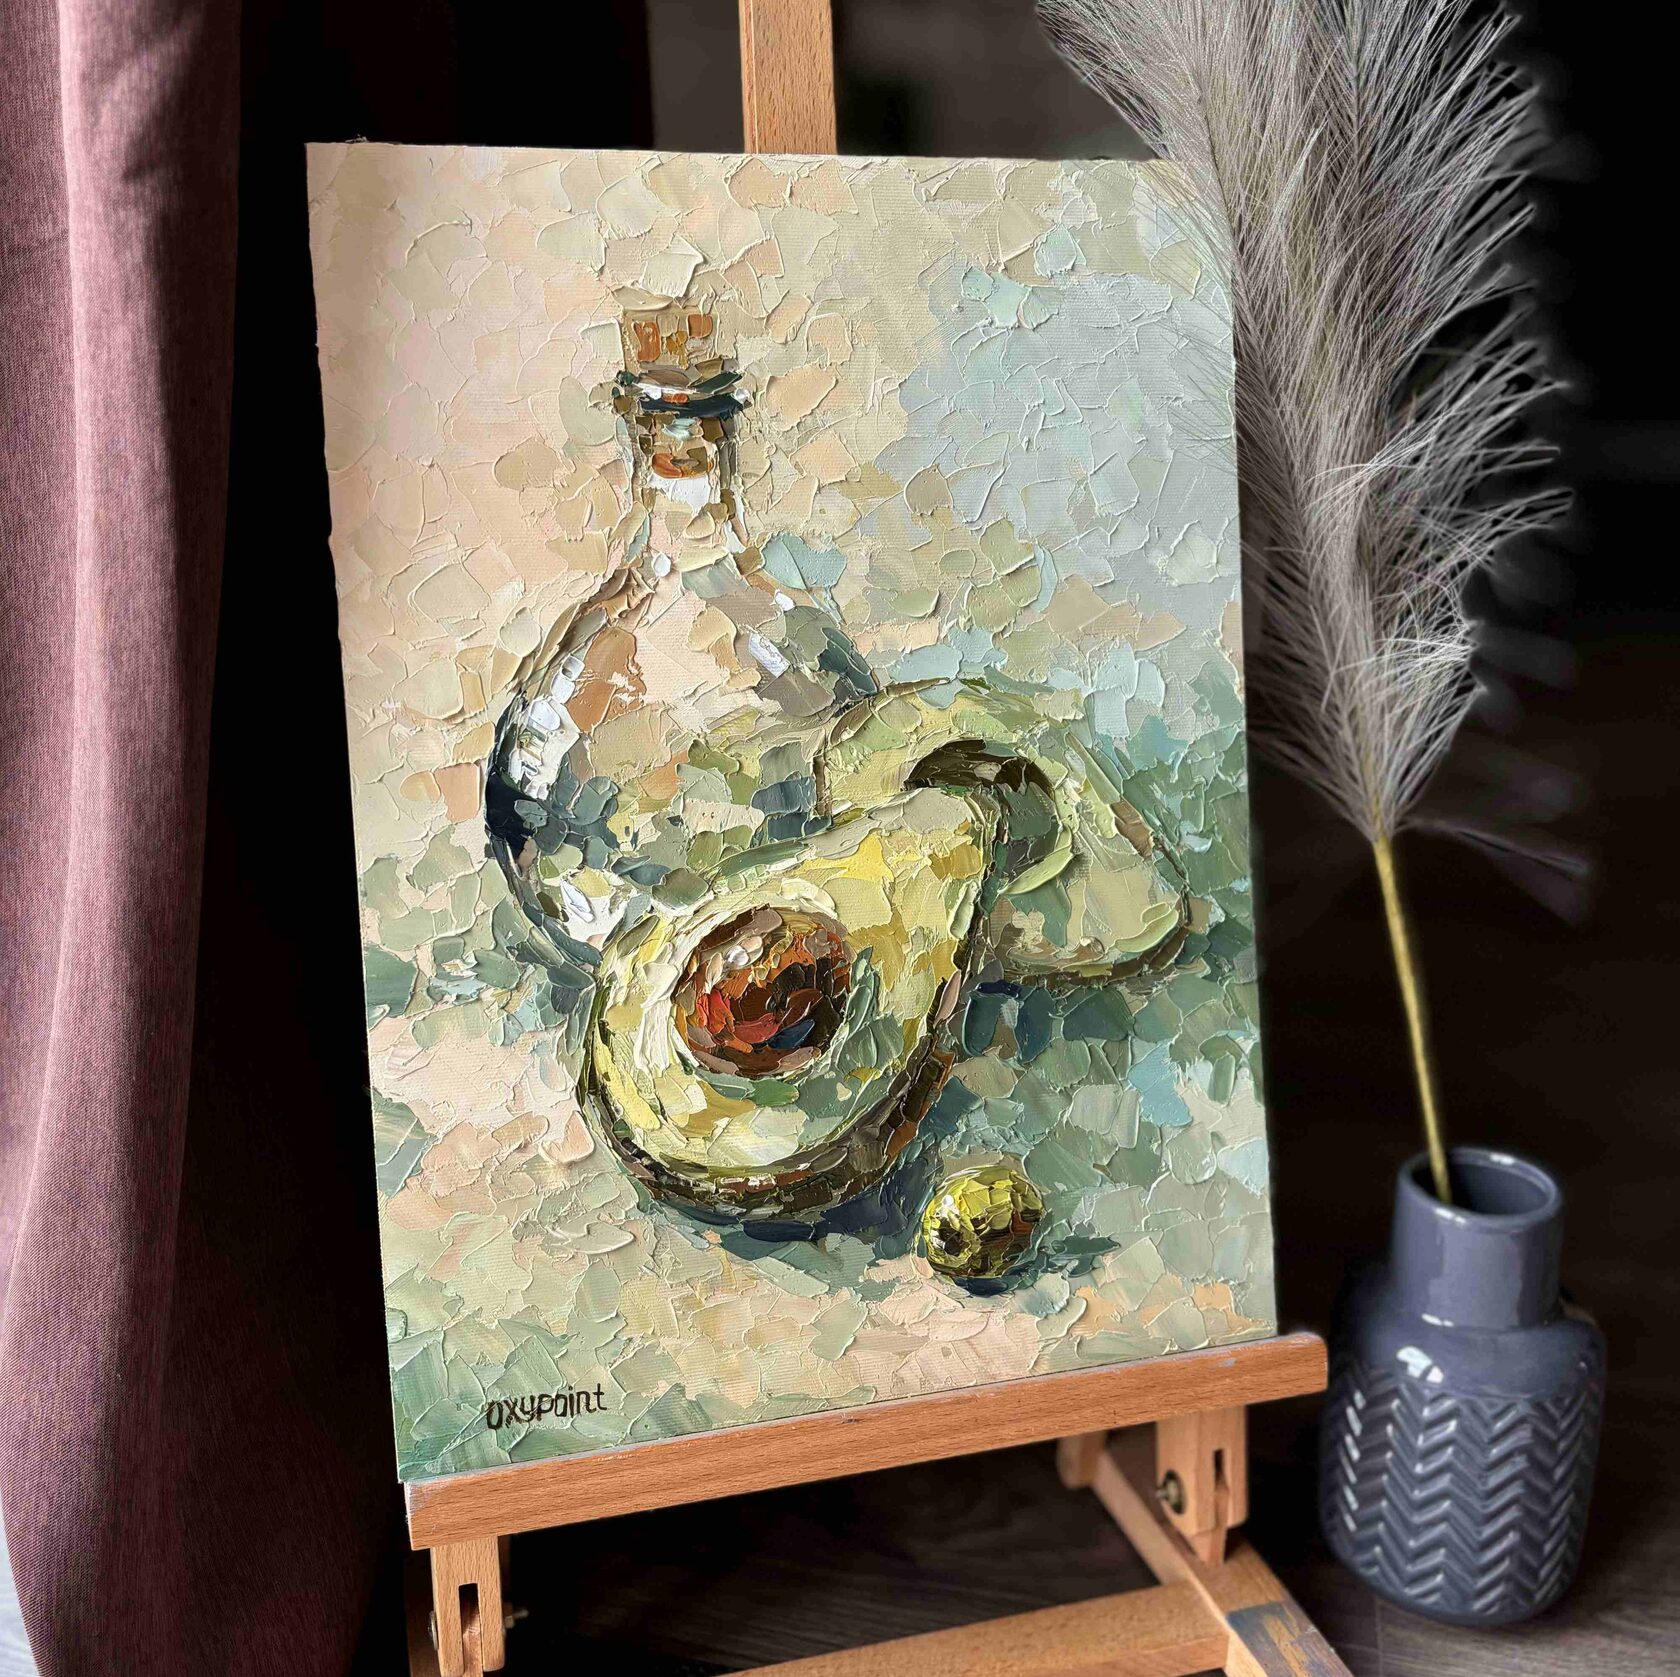 avocado oil painting, still life with avocado, abstract art, painting with a knife, artist OXYPOINT Oxana Kravtsova